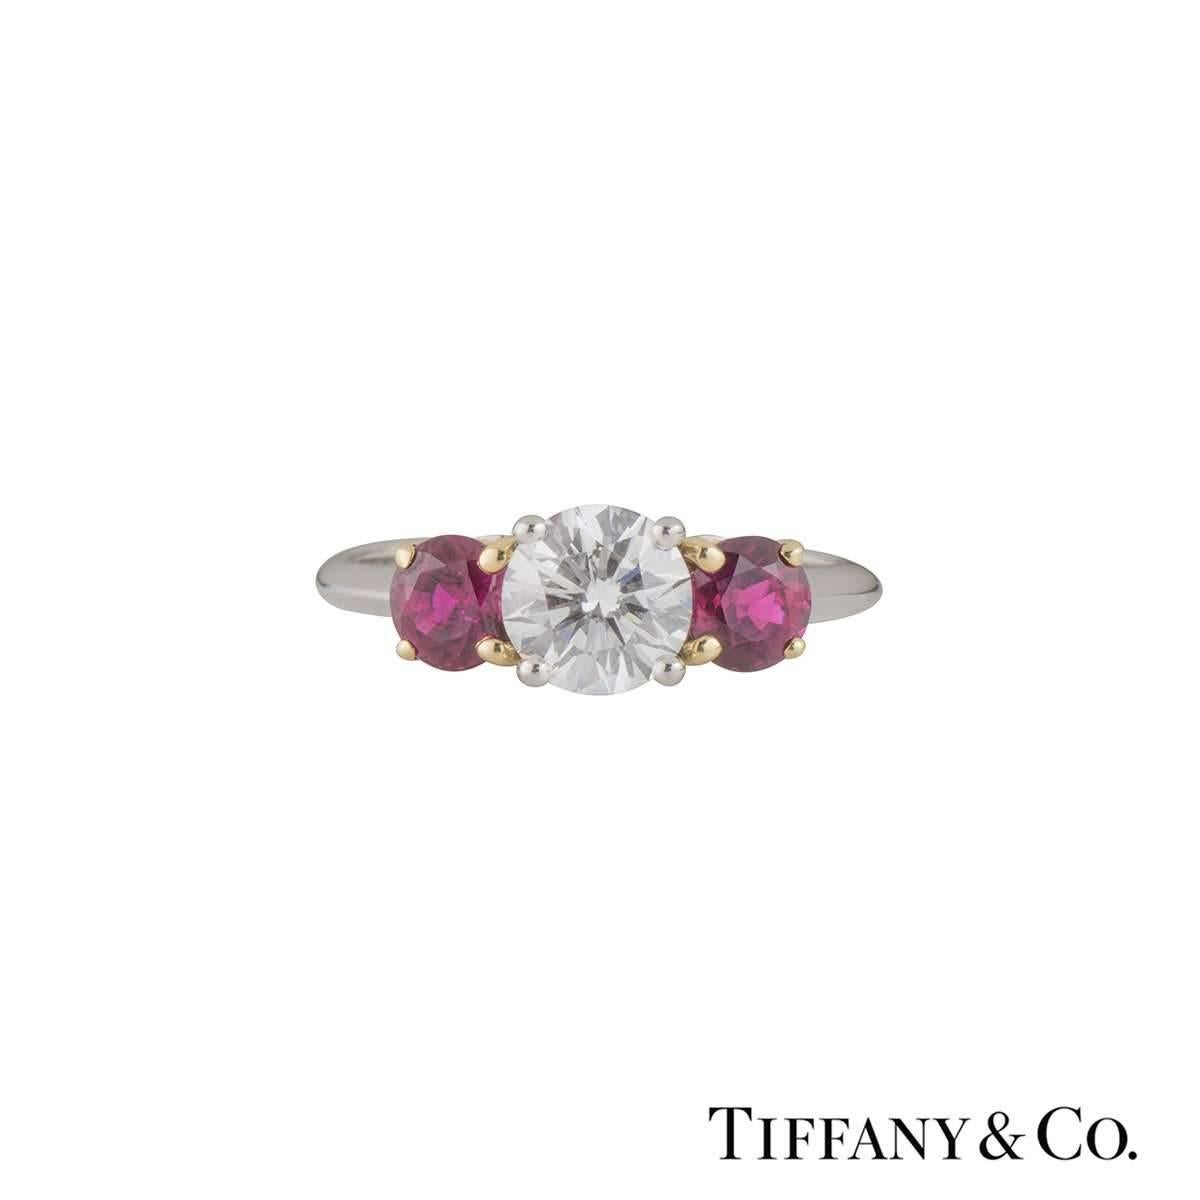 A luxurious platinum and 18k yellow gold Tiffany & Co. diamond and ruby ring from the Three Stone with Ruby collection. The ring comprises of a round brilliant cut diamond in a 4 claw setting in a platinum band. Complementing the centre diamond are